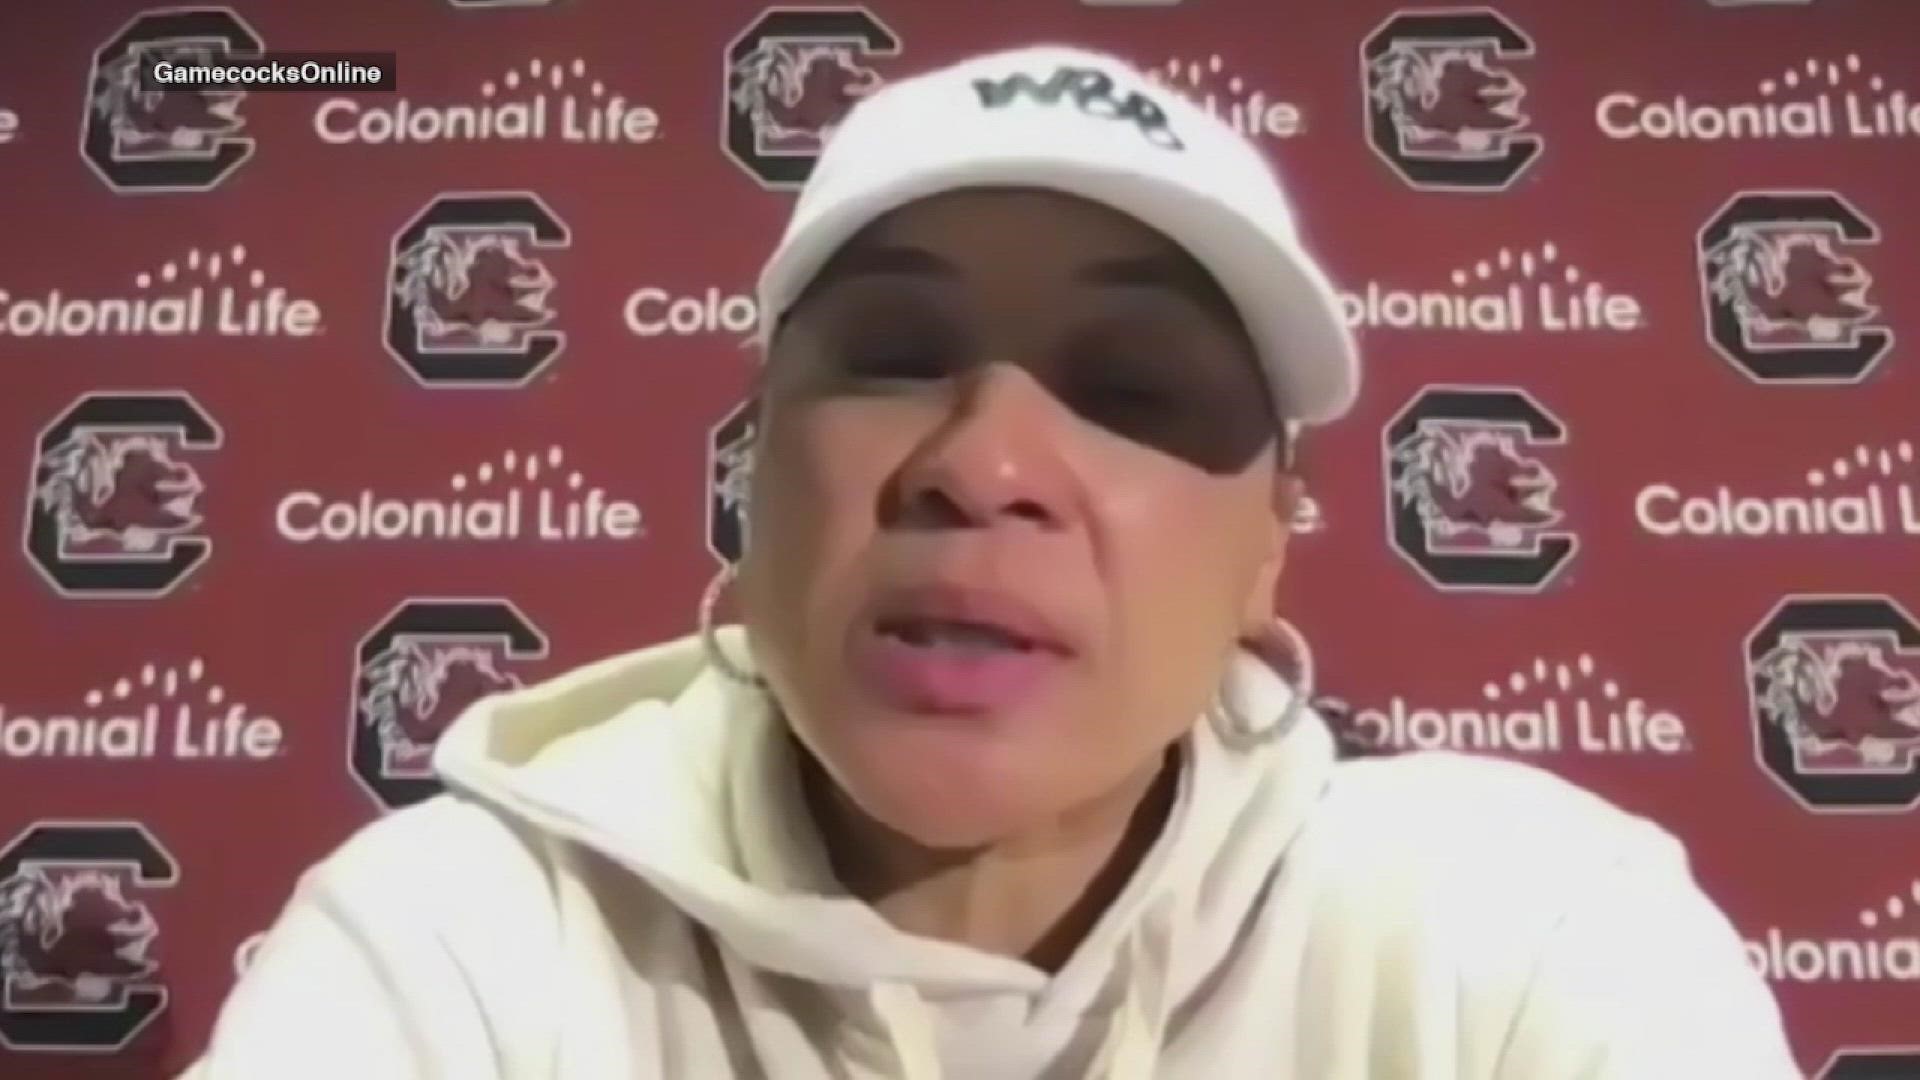 Dawn Staley sticks up for her star player on social media. The coach is frustrated that Aliyah Boston is getting the short end from national broadcasters.